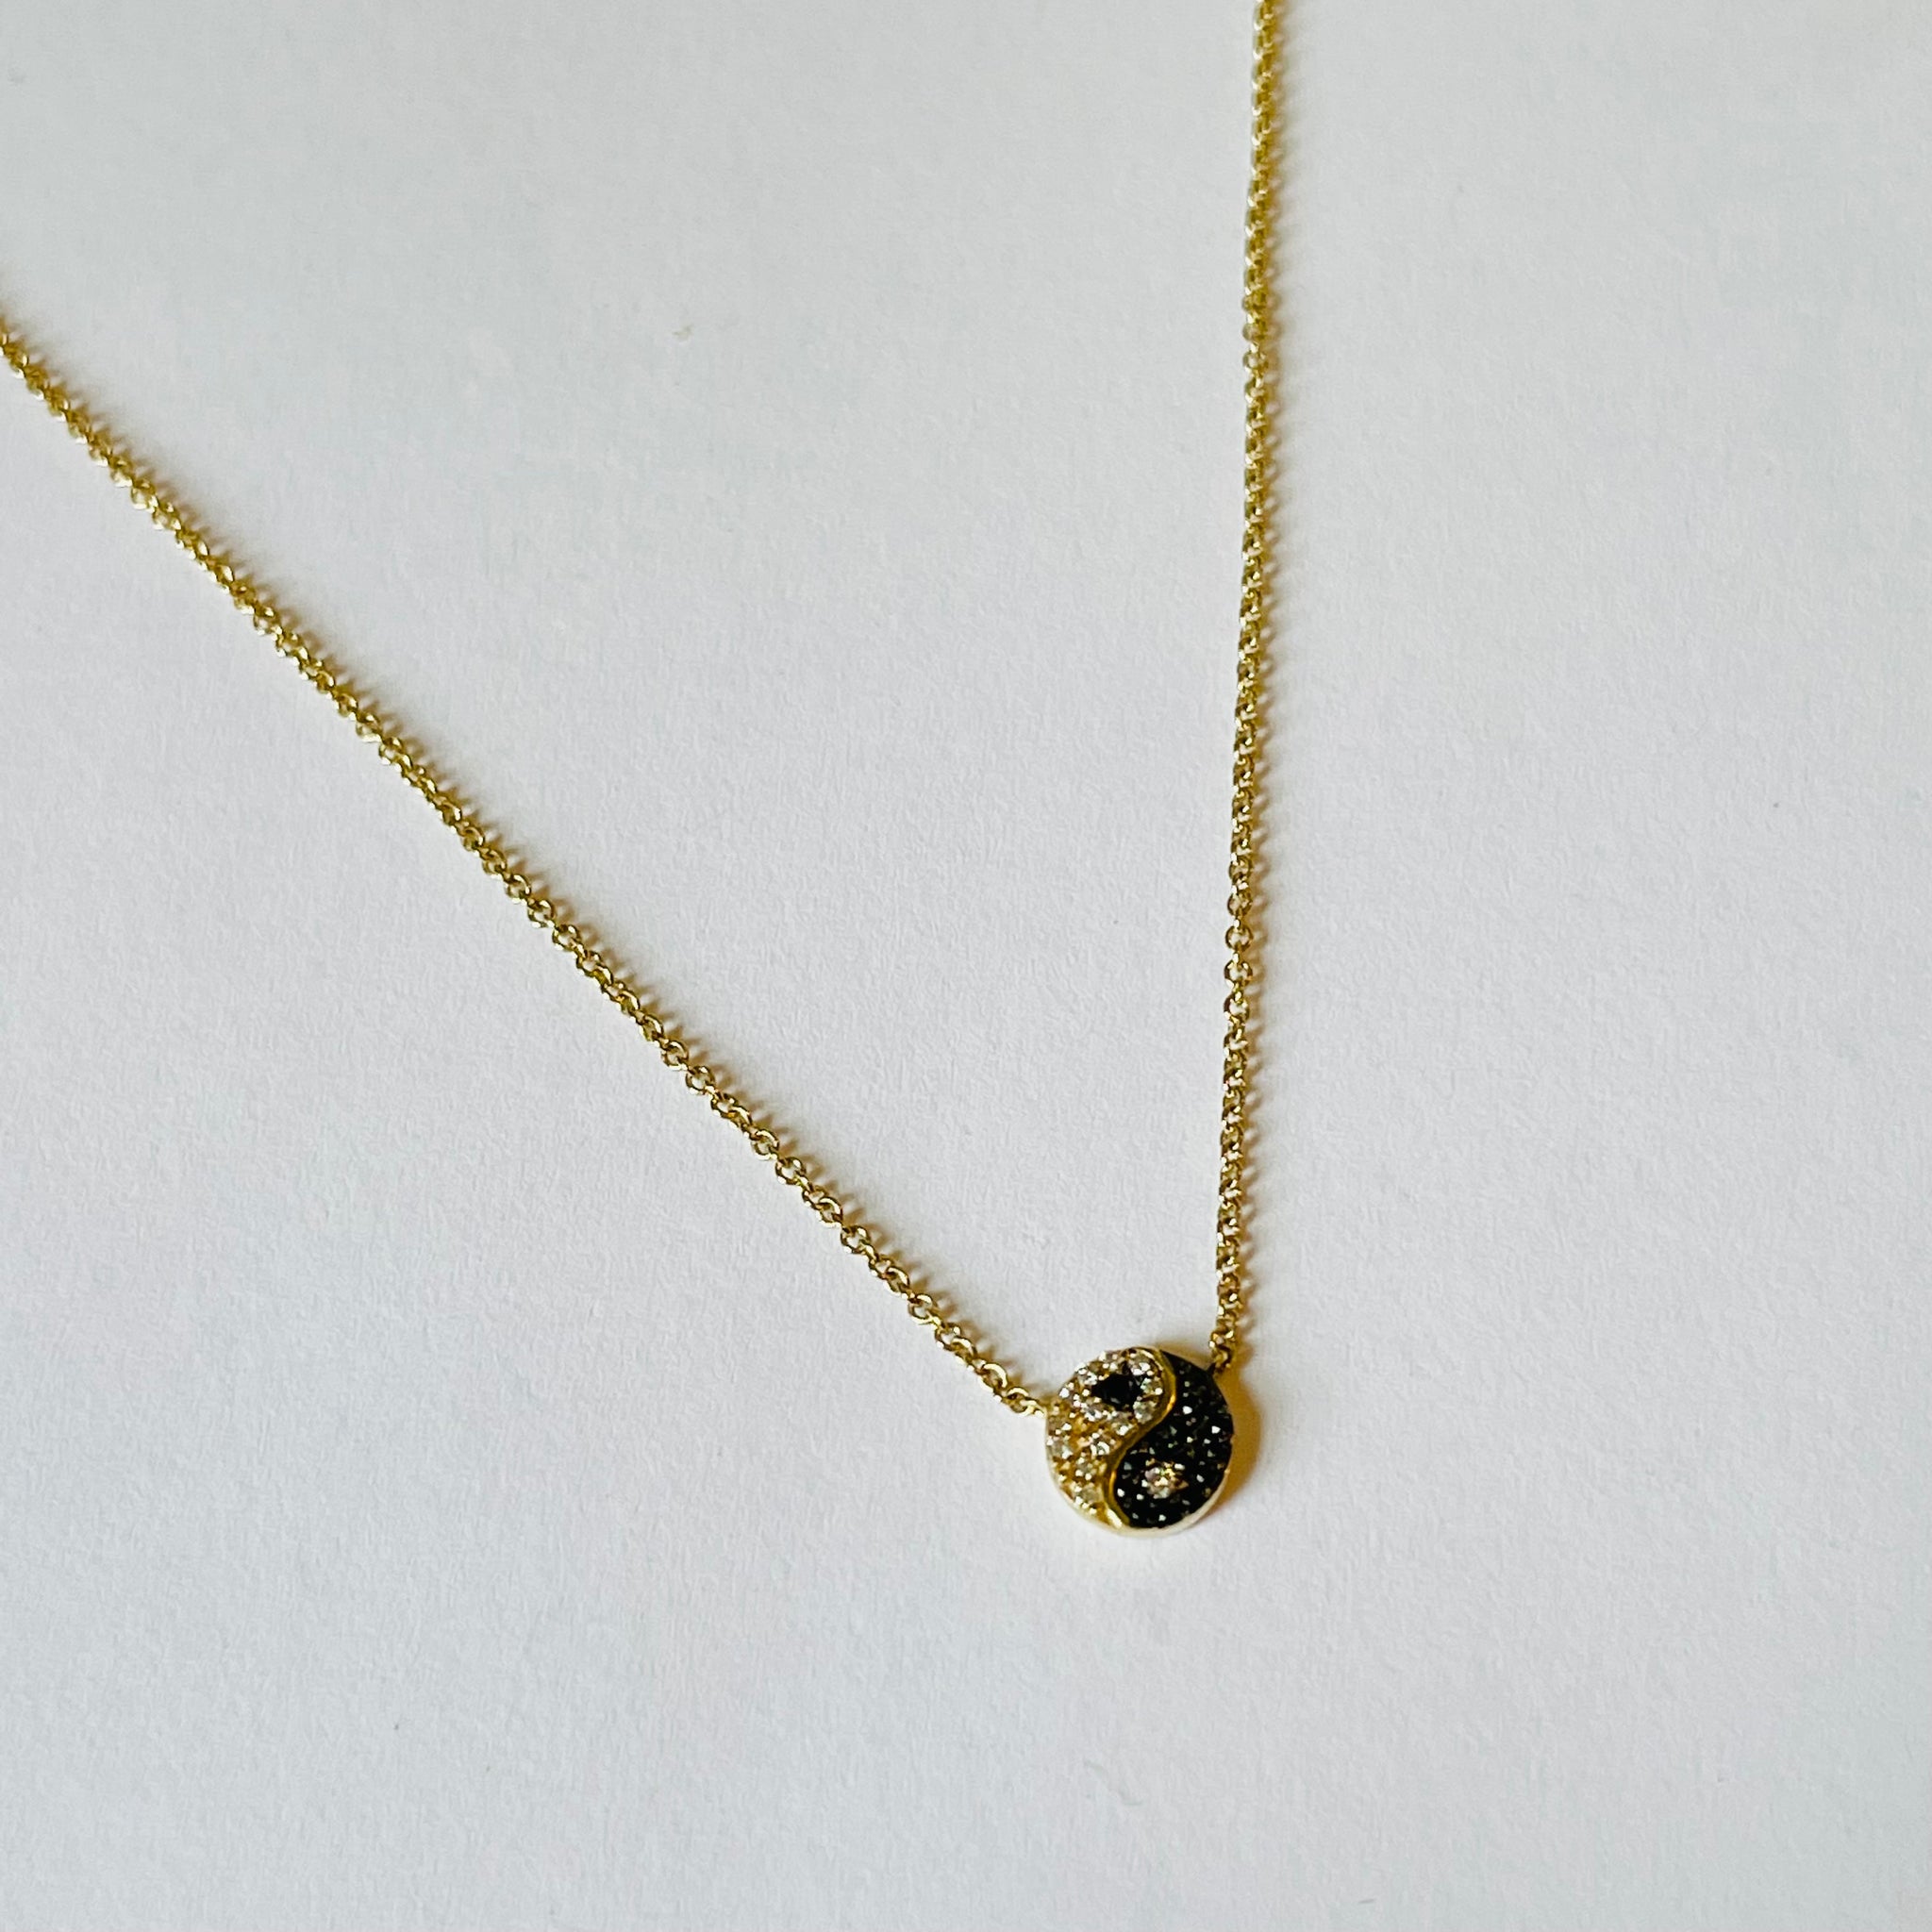 ying yang on gold chain